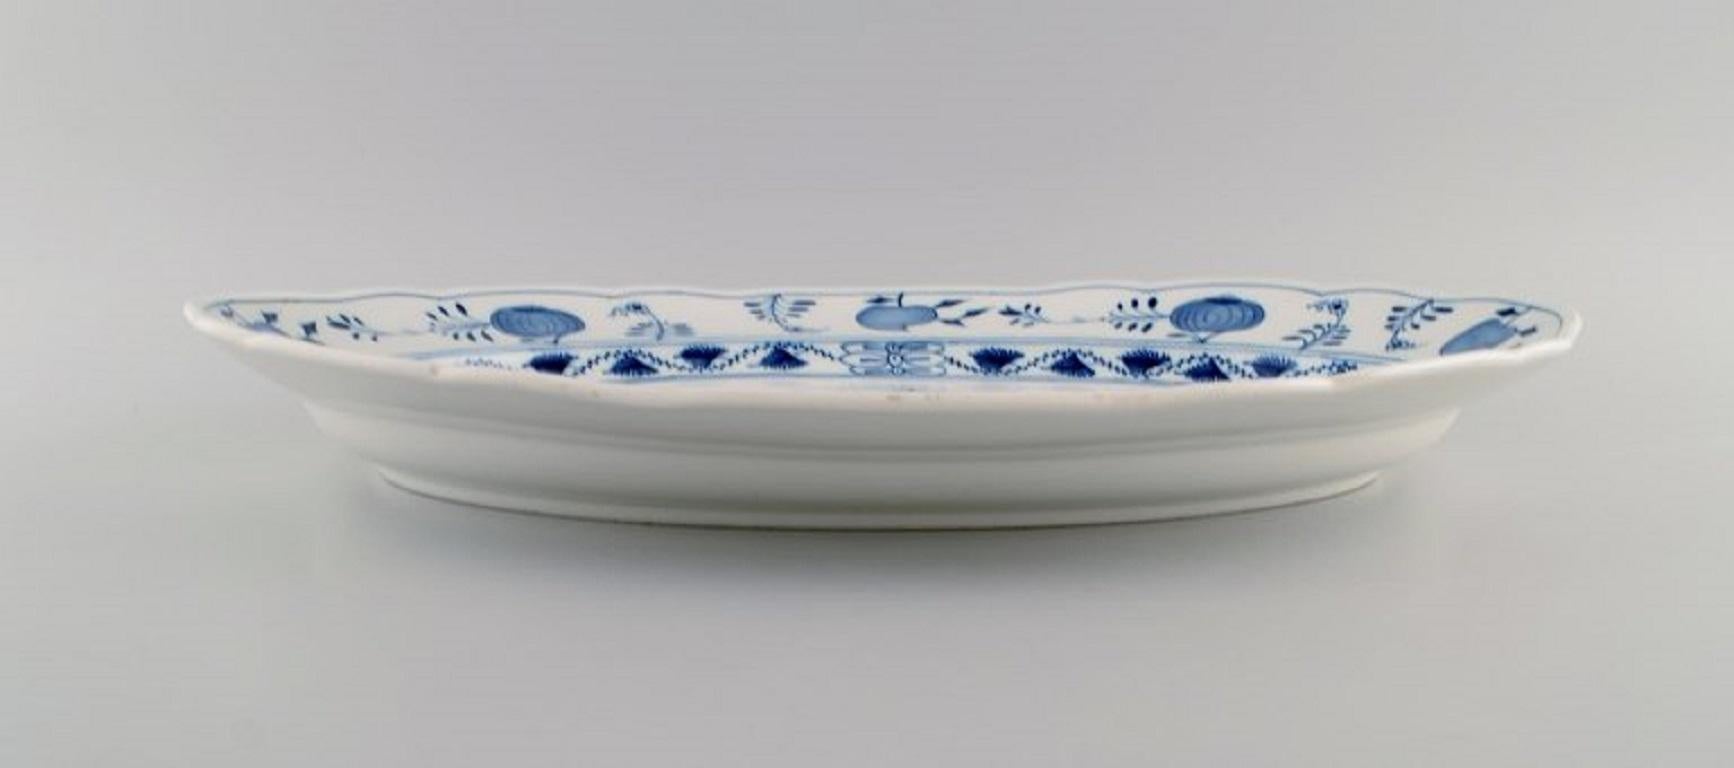 19th Century Very Large Antique Meissen Blue Onion Serving Dish in Hand-Painted Porcelain